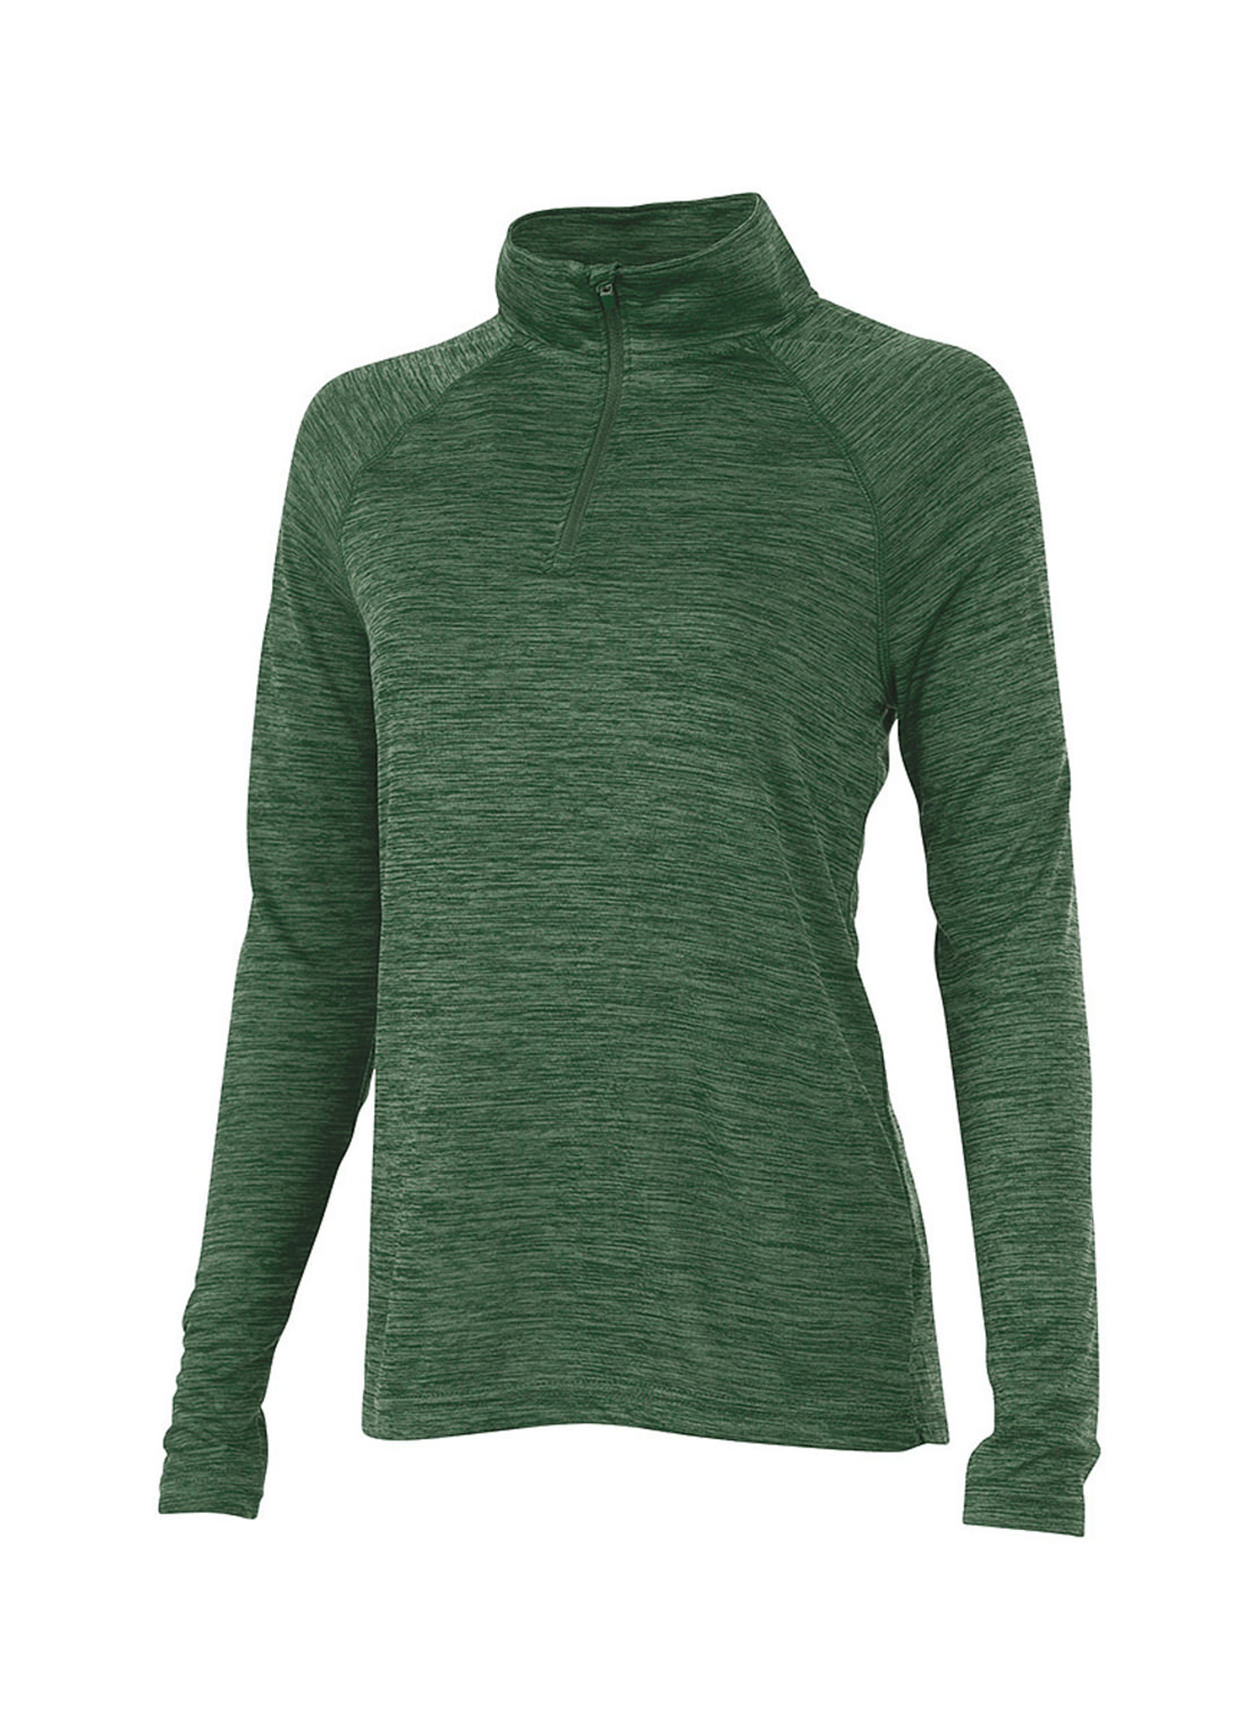 Charles River Women's Forest Space Dyed Quarter-Zip